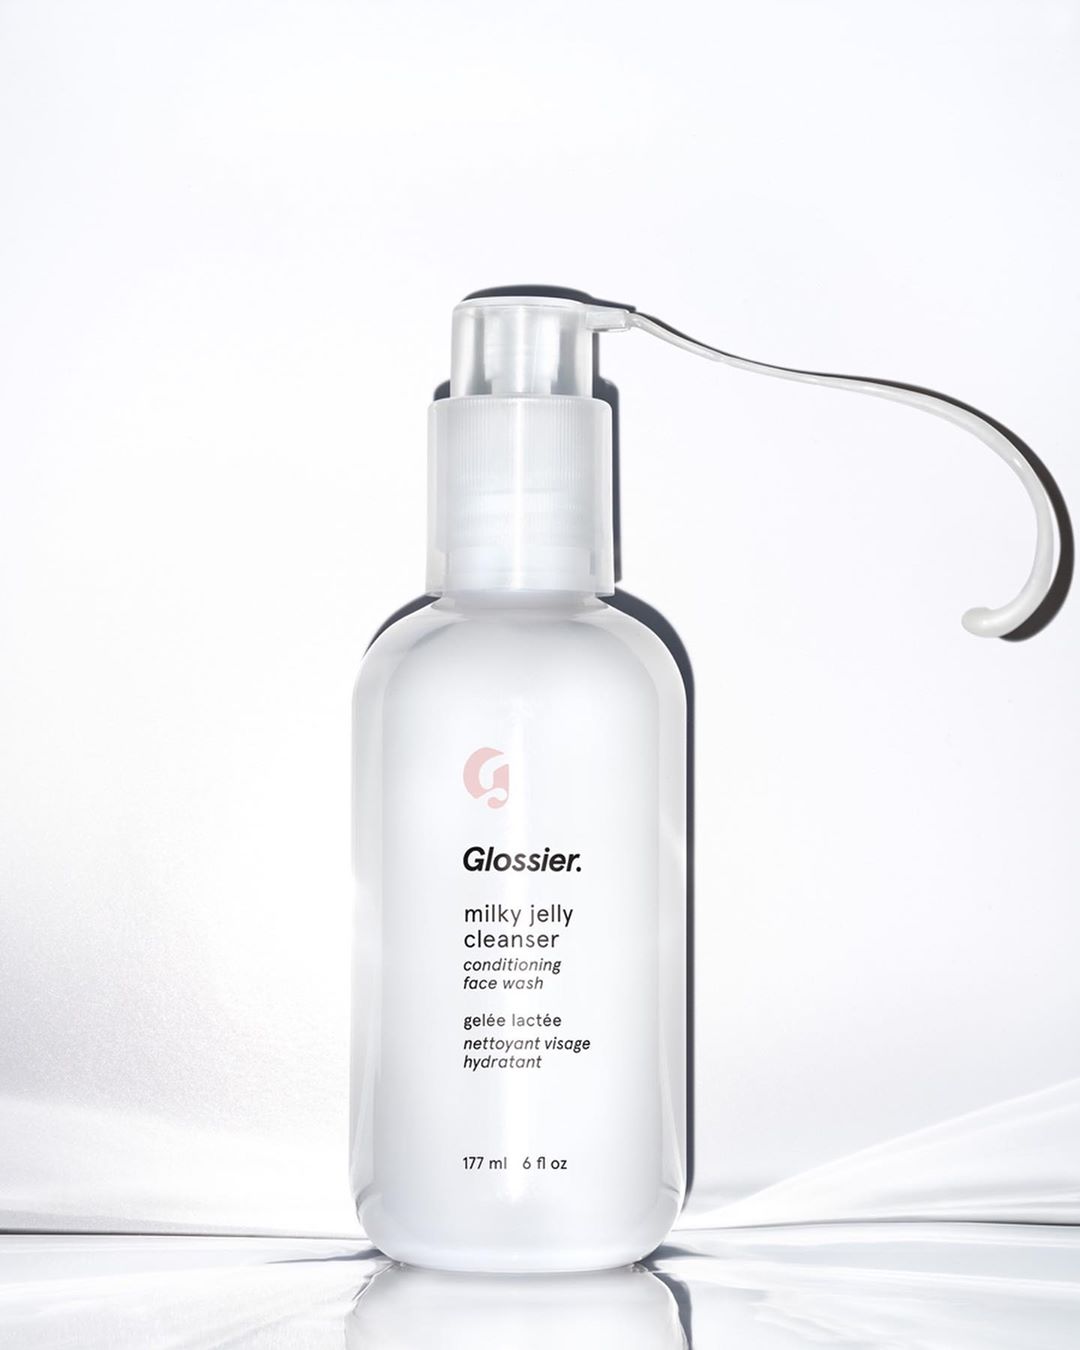 Milky Jelly Cleanser